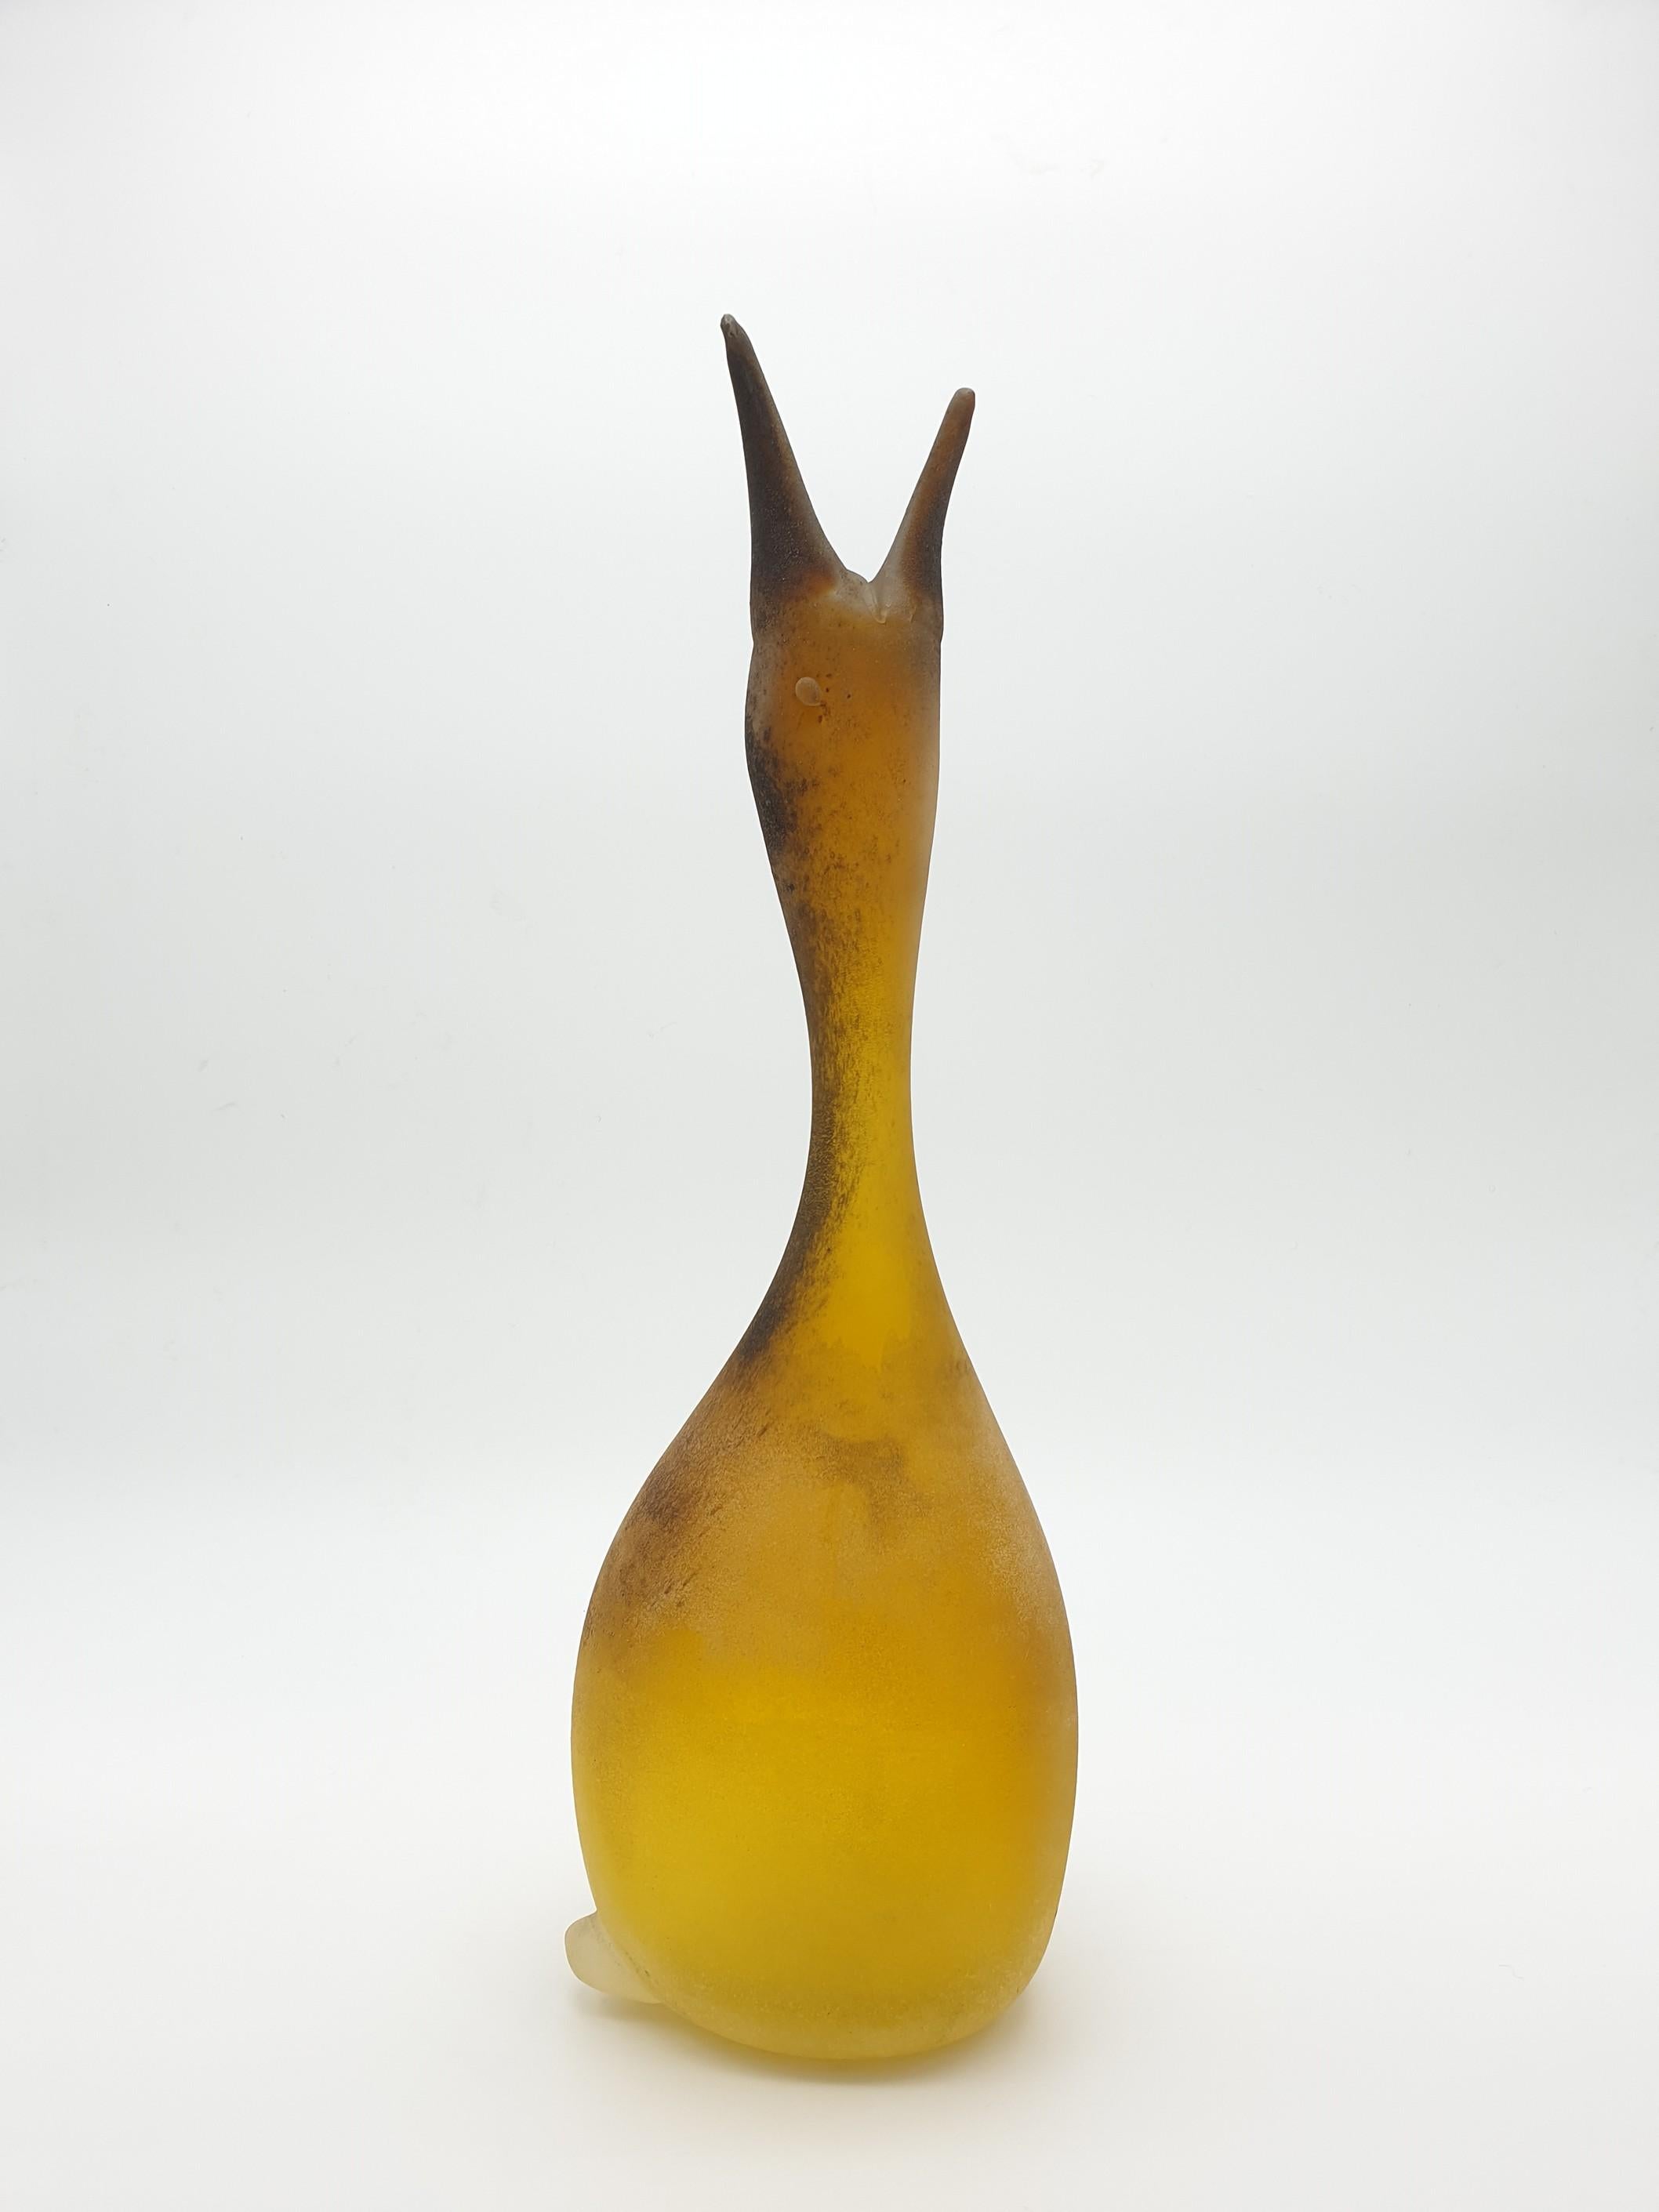 This zoomorphic vase, with the neck shaped in the form of a duck head, was designed by Antonio da Ros at the Gino Cenedese e Figlio glass-factory in Murano. This stunning vase in bright yellow color is 45cm tall and has been completely handmade,